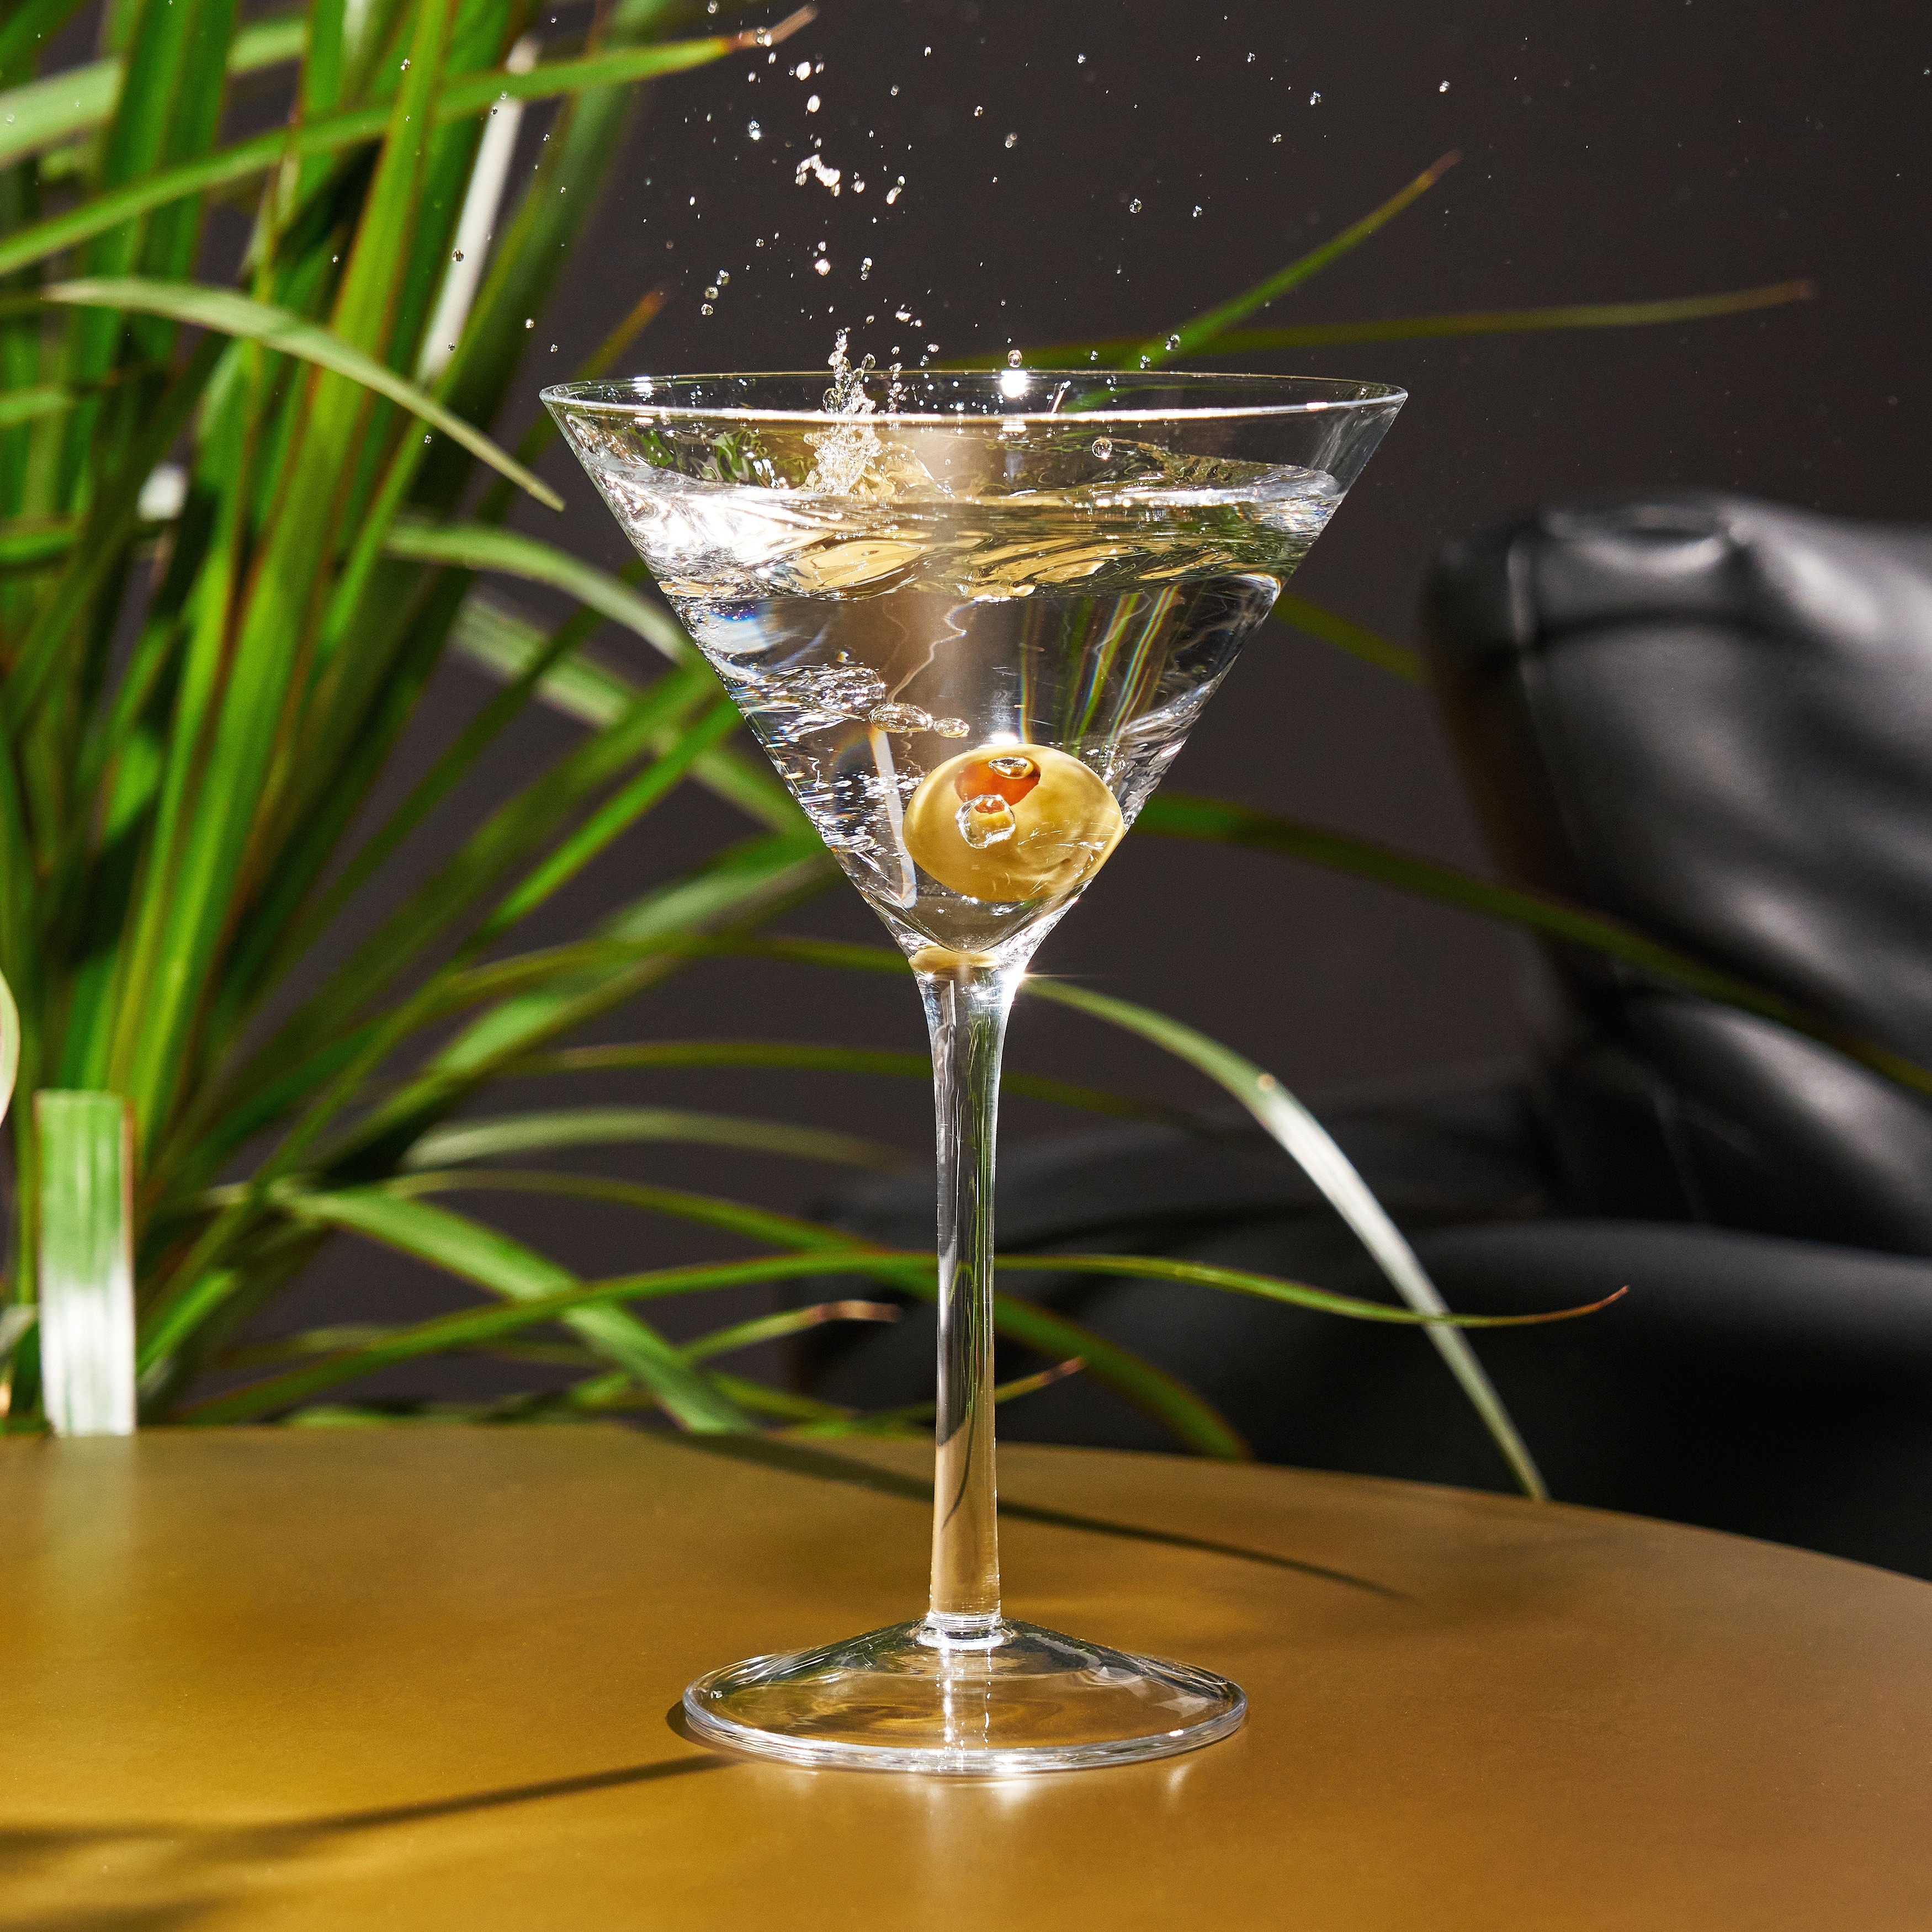 https://ak1.ostkcdn.com/images/products/is/images/direct/4c14b5d7b0e713d4bd357383d293b6a01cf403e8/Viski-Stemmed-Martini-Glasses%2C-4-Lead-Free-Crystal-Stemmed-Cocktail-Glasses%2C-European-Made-Glassware%2C-Set-of-4%2C-7-Ounces.jpg